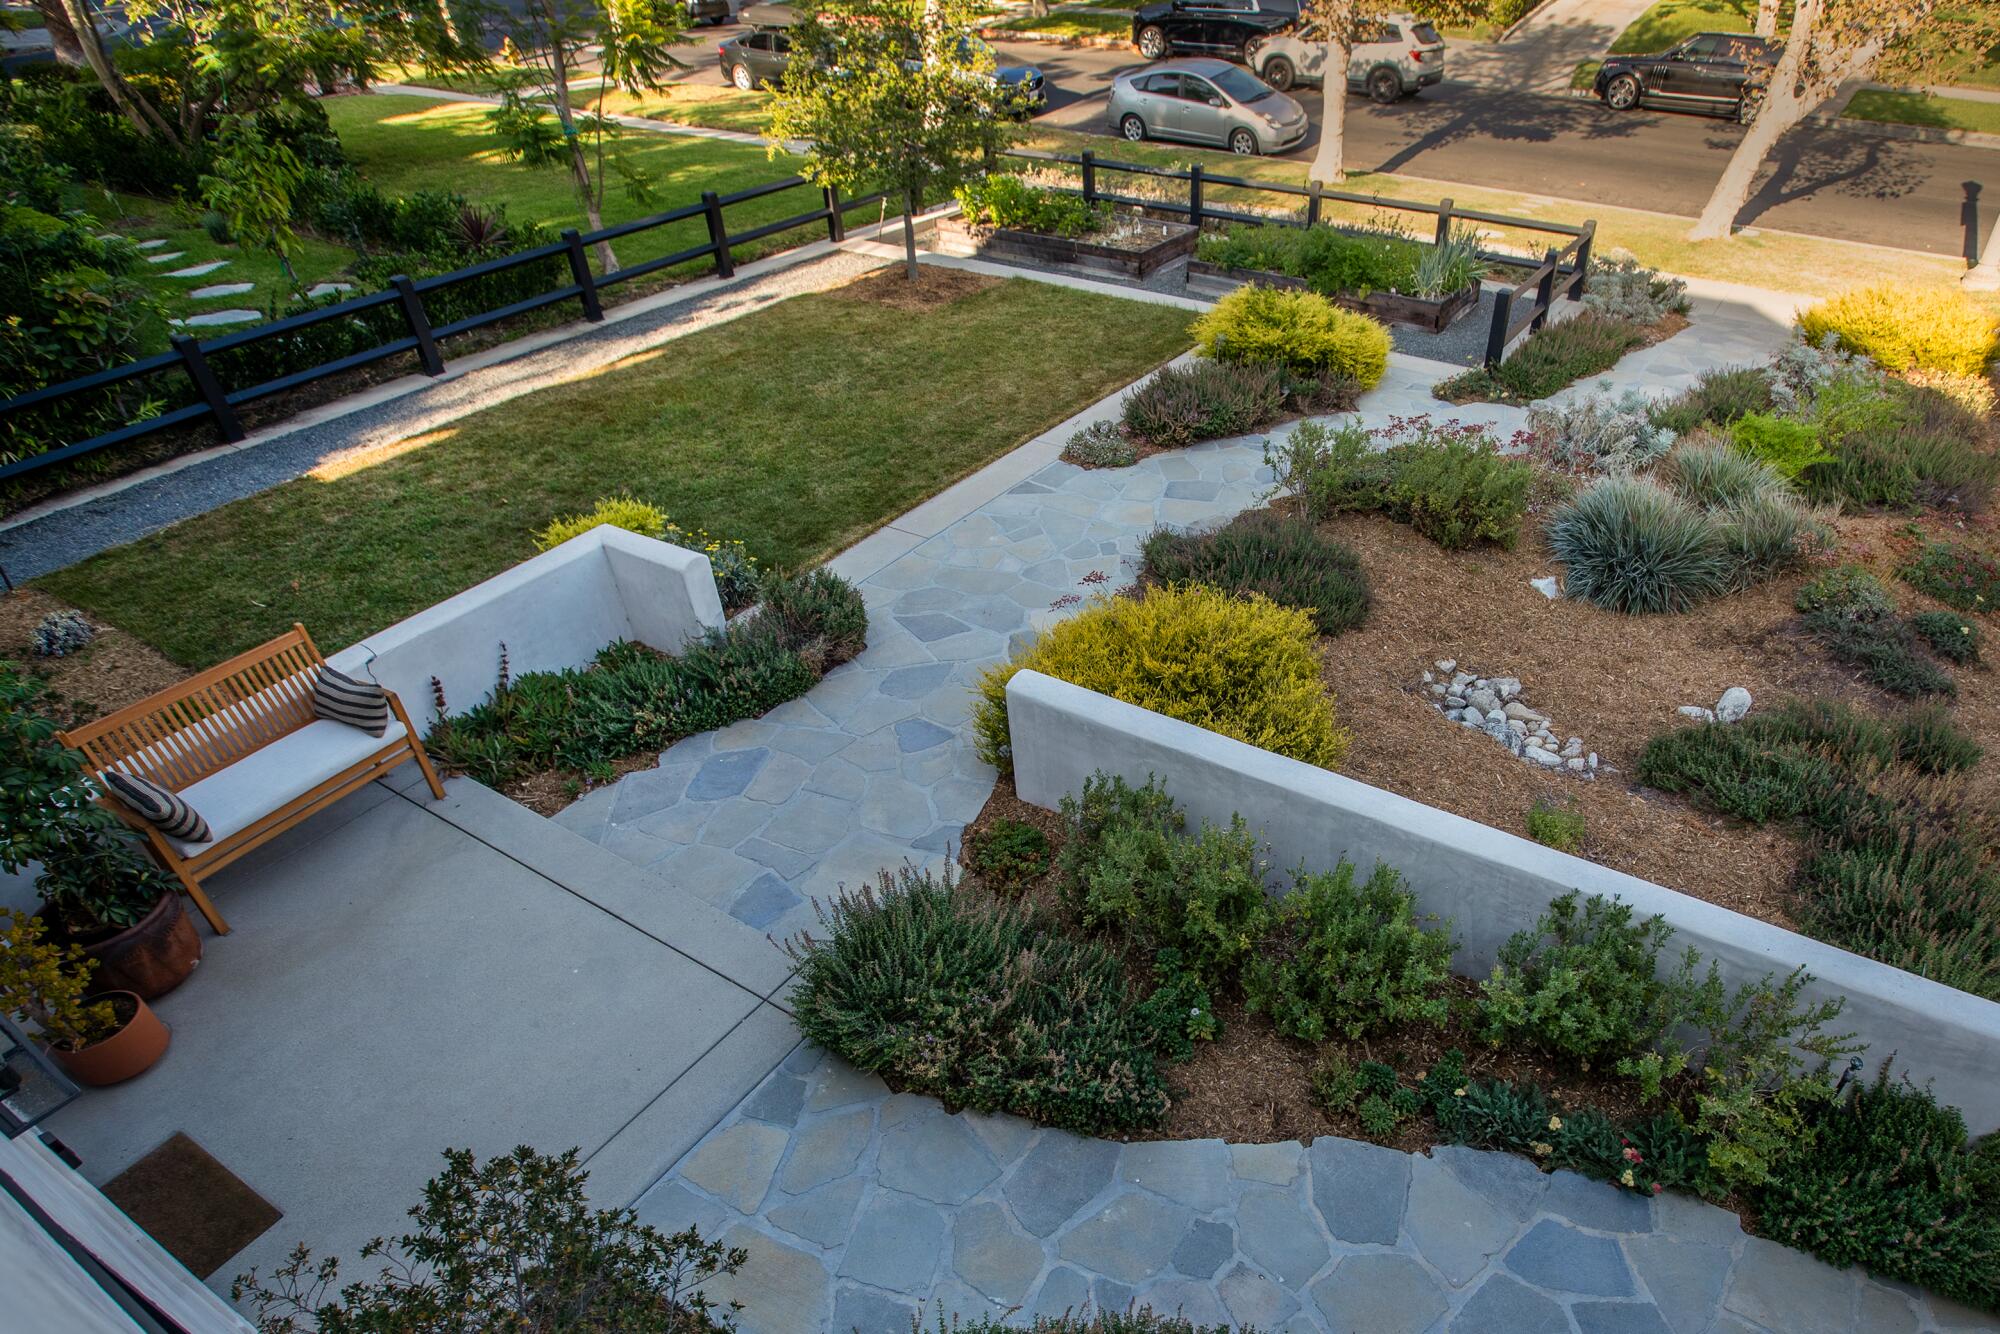 An overhead view of the Matloffs' garden and concrete pavers. 